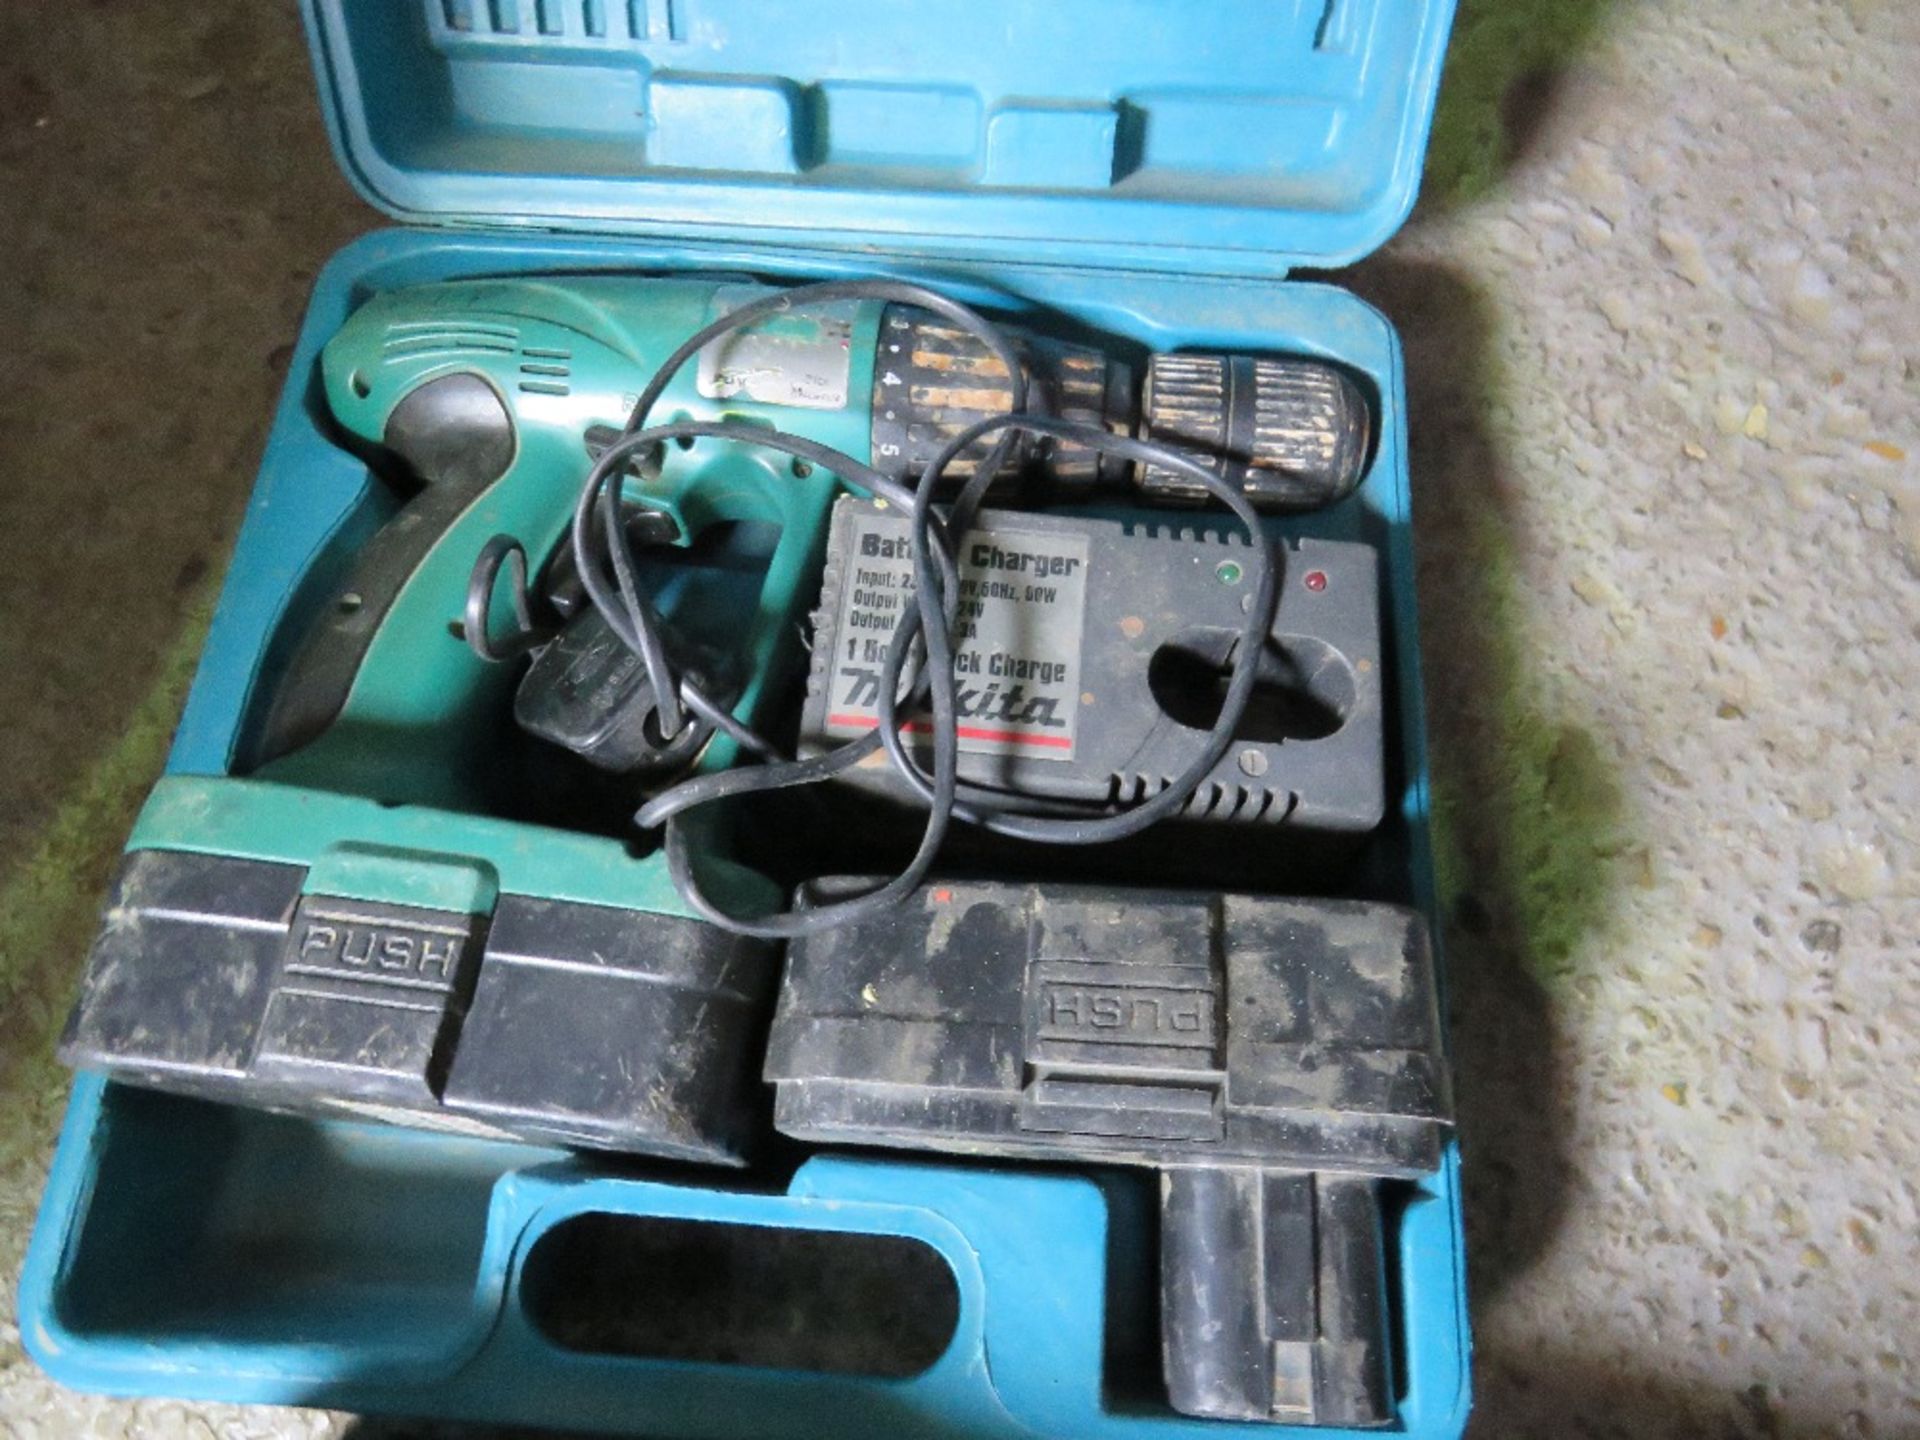 3 X BATTERY DRILLS IN CASES. - Image 4 of 4